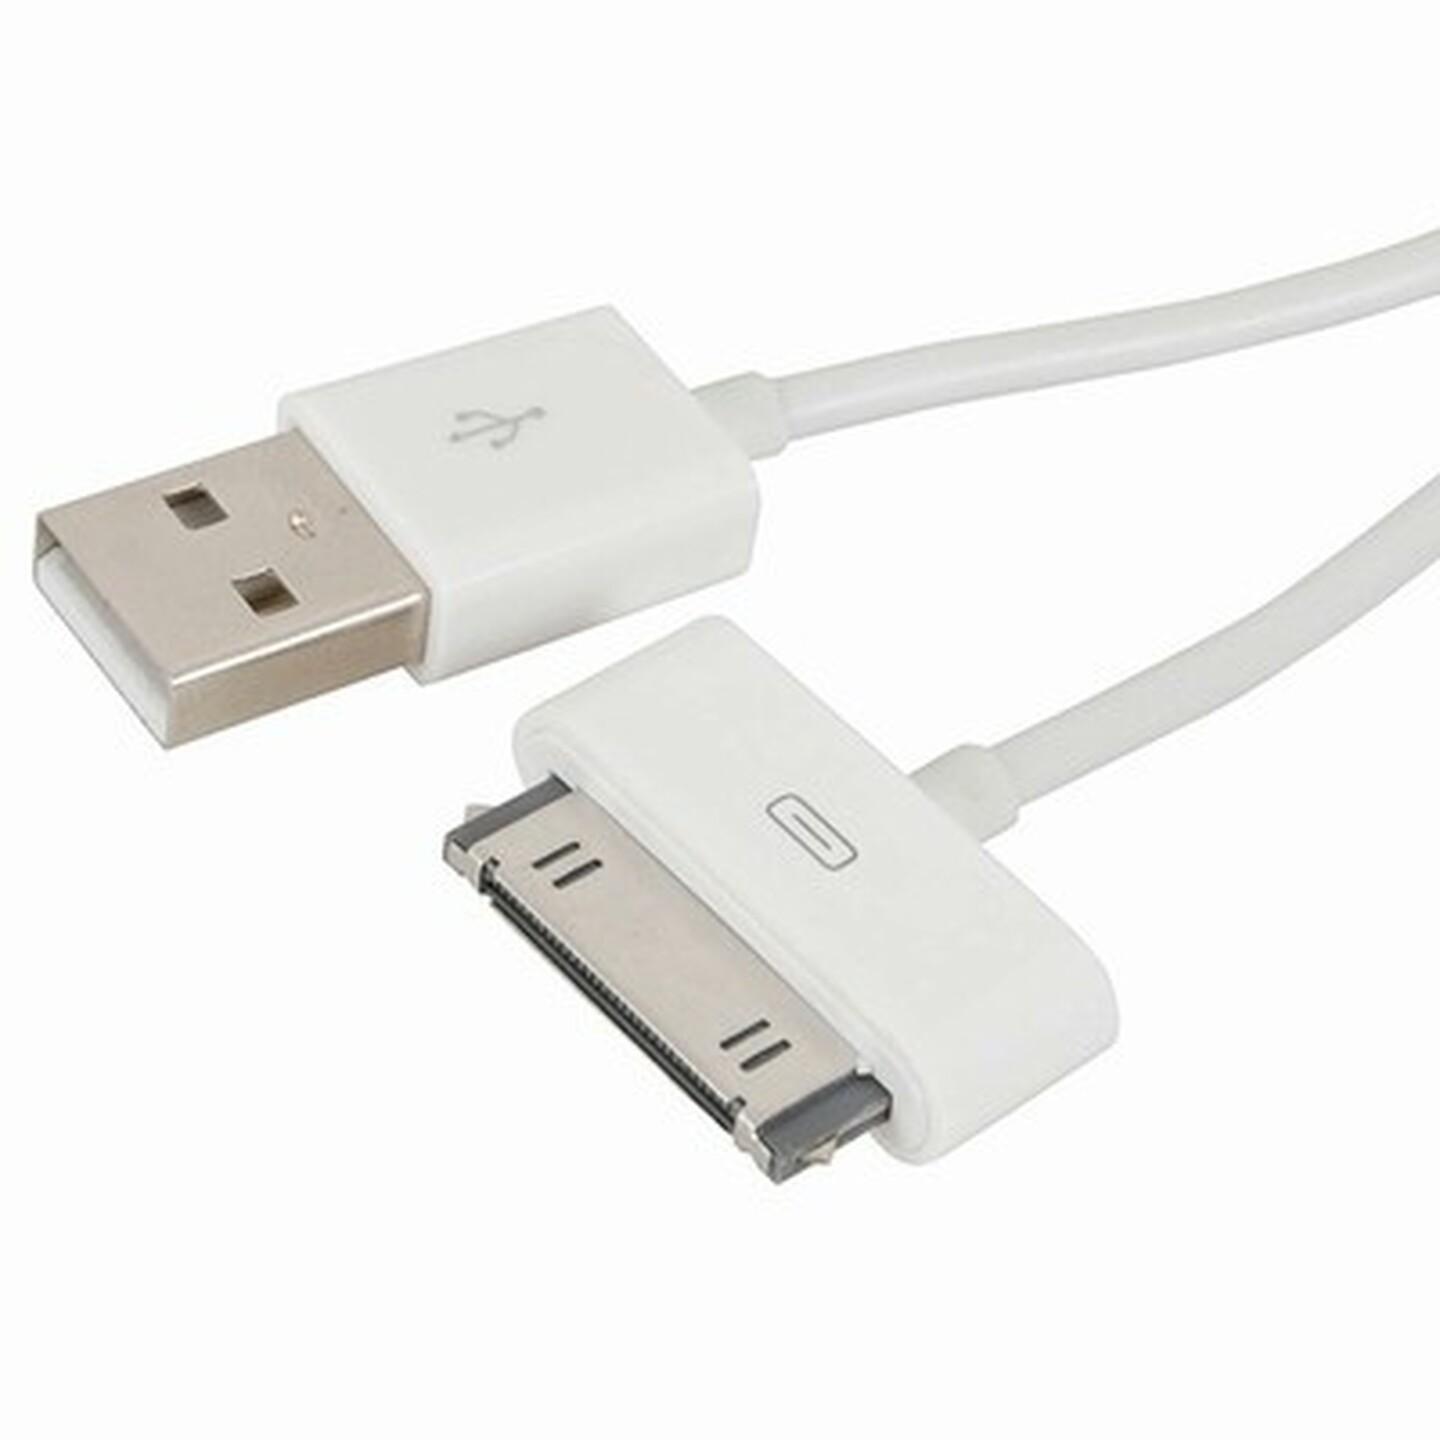 150mm USB Cable for iPad/iPhone/iPod